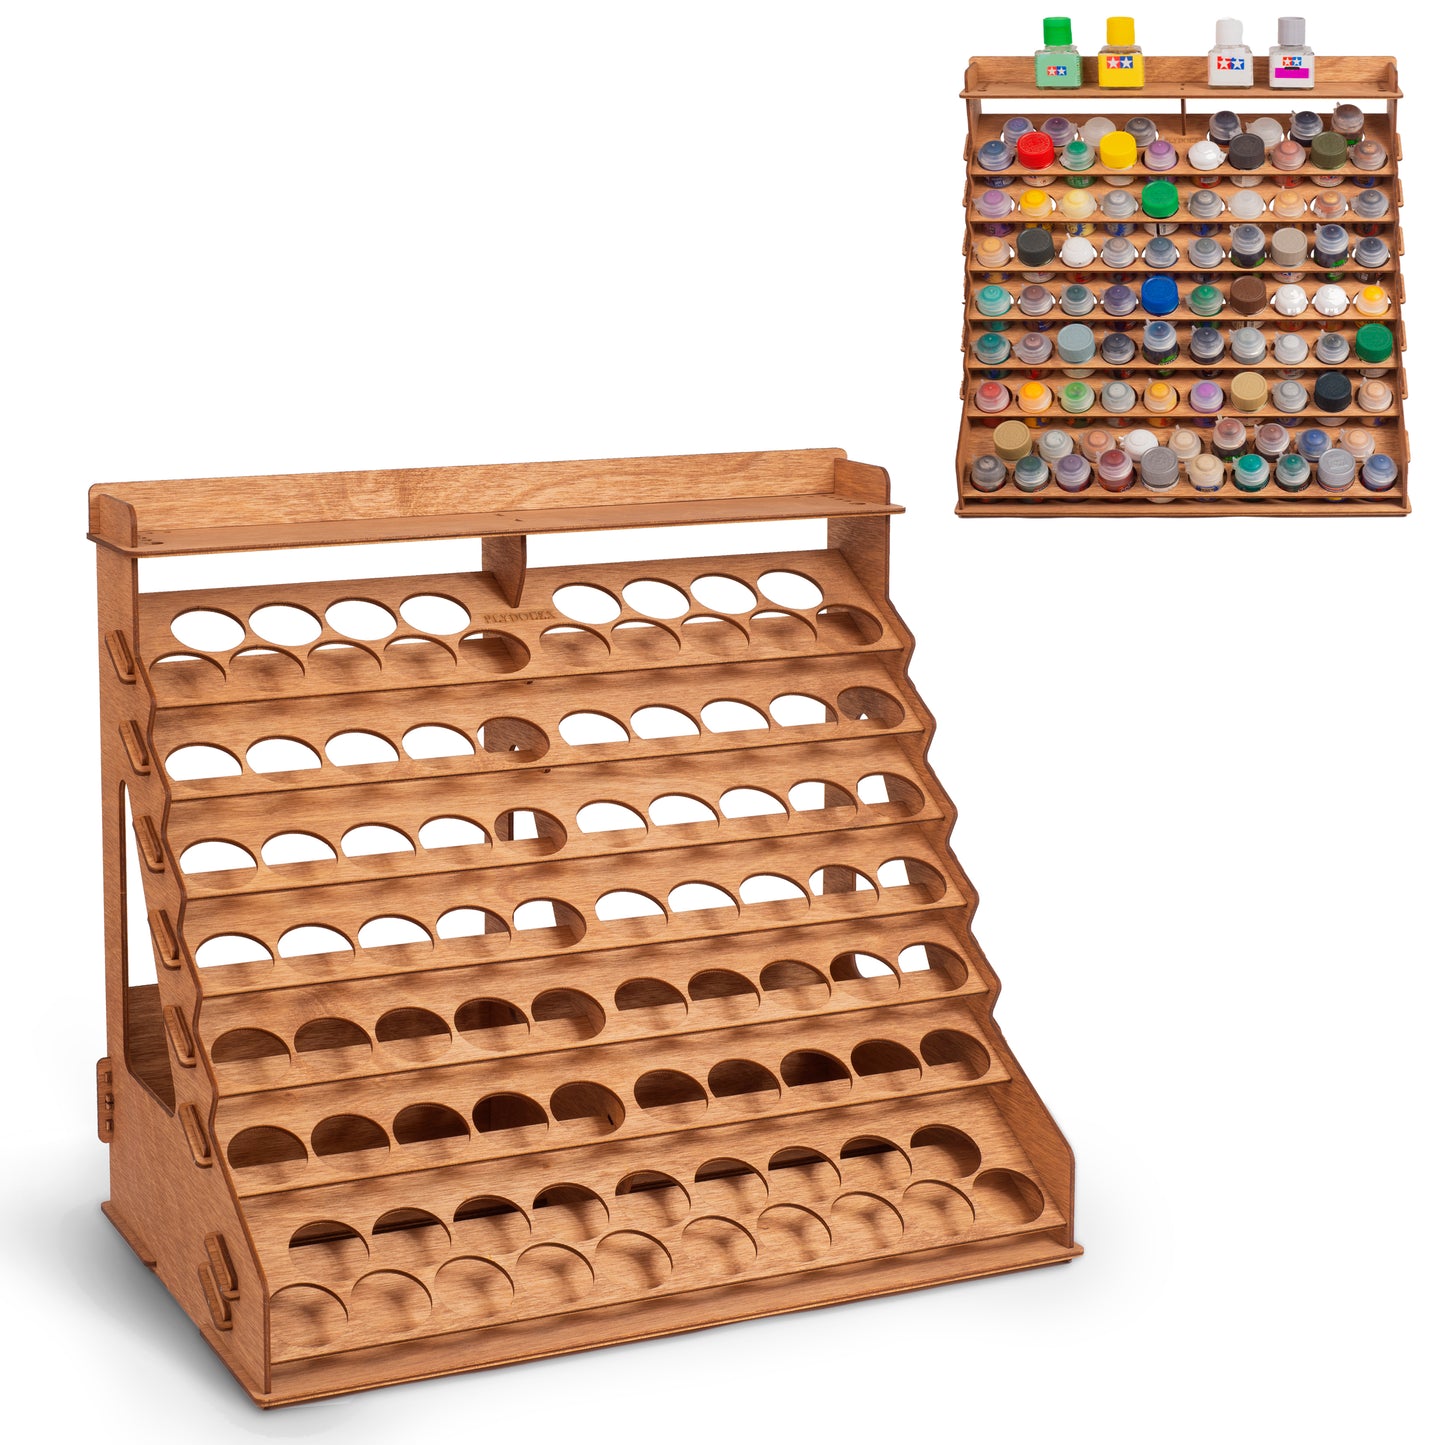 PLYDOLEX Citadel Paint Organizer for 87 Paint Bottles and 14 Brushes - –  Plywood Organizers for Miniaute Painters - Wooden HandCraft Gift and  Accessories by Plydolex